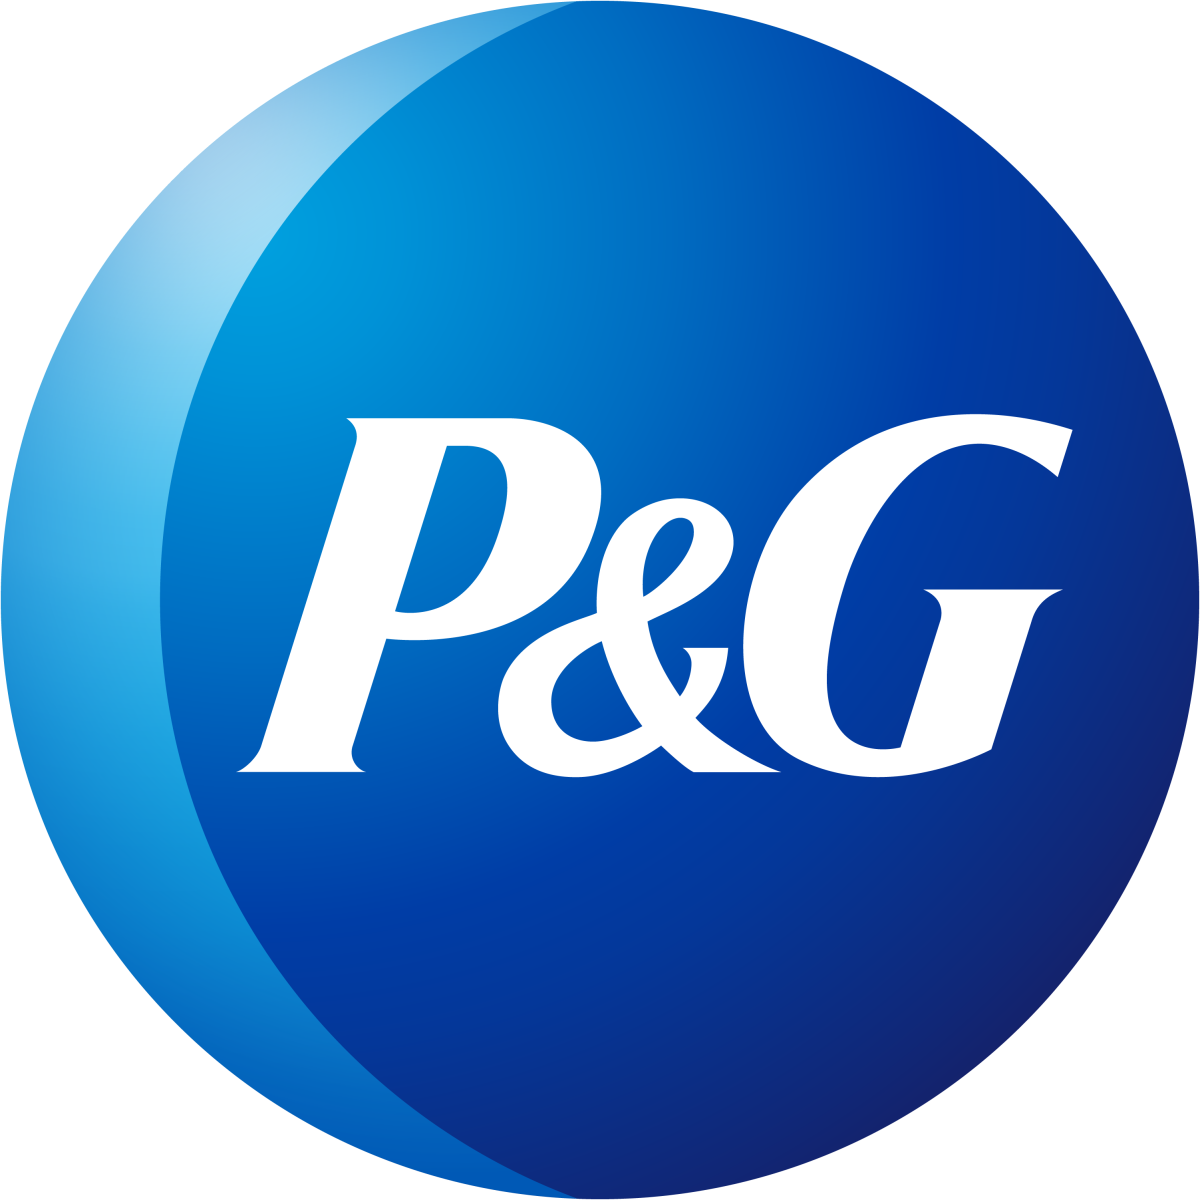 During the 1981-82 television season, there were six Procter & Gamble (P&G) soap operas that aired on the major TV networks.